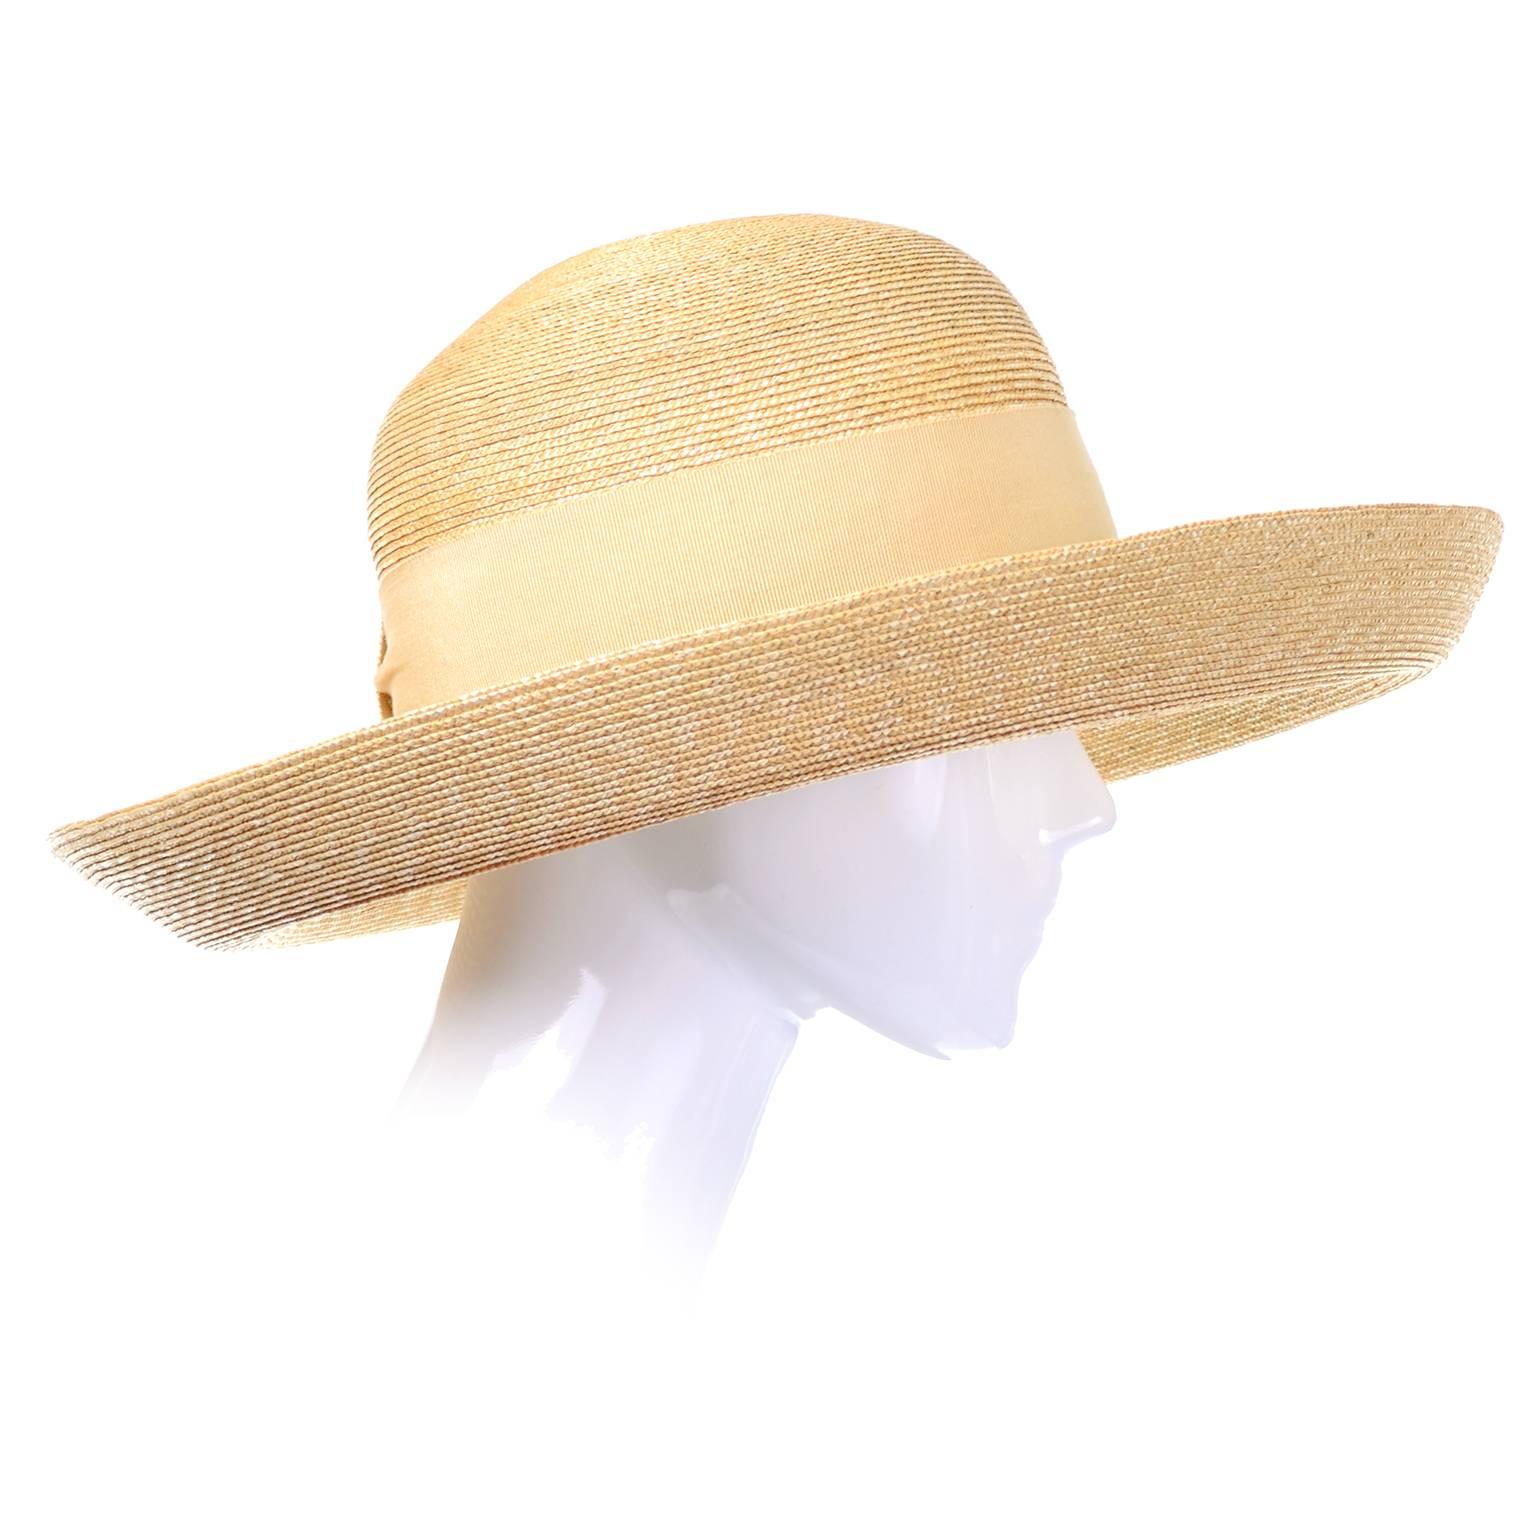 vintage straw hat with ribbon